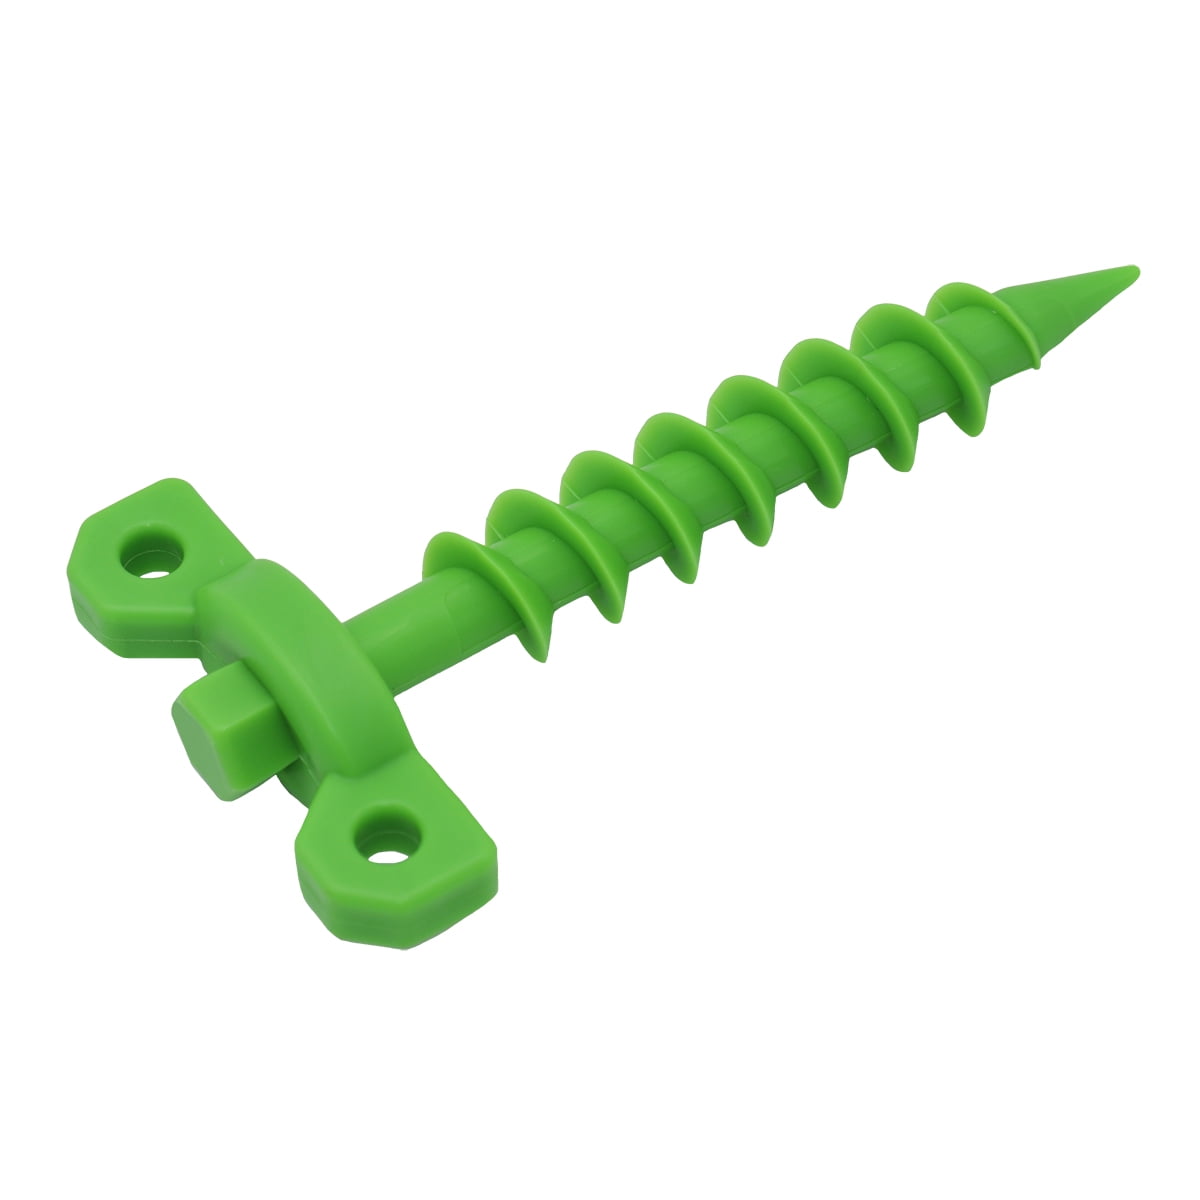 Grip 7.5 Hay Bale Screw Anchor Stake (4 pack) - Holds Tight In Any Type of  Bale to Secure/Tie Down Tarps - Tie Down Points for Rope, Bungee Cords